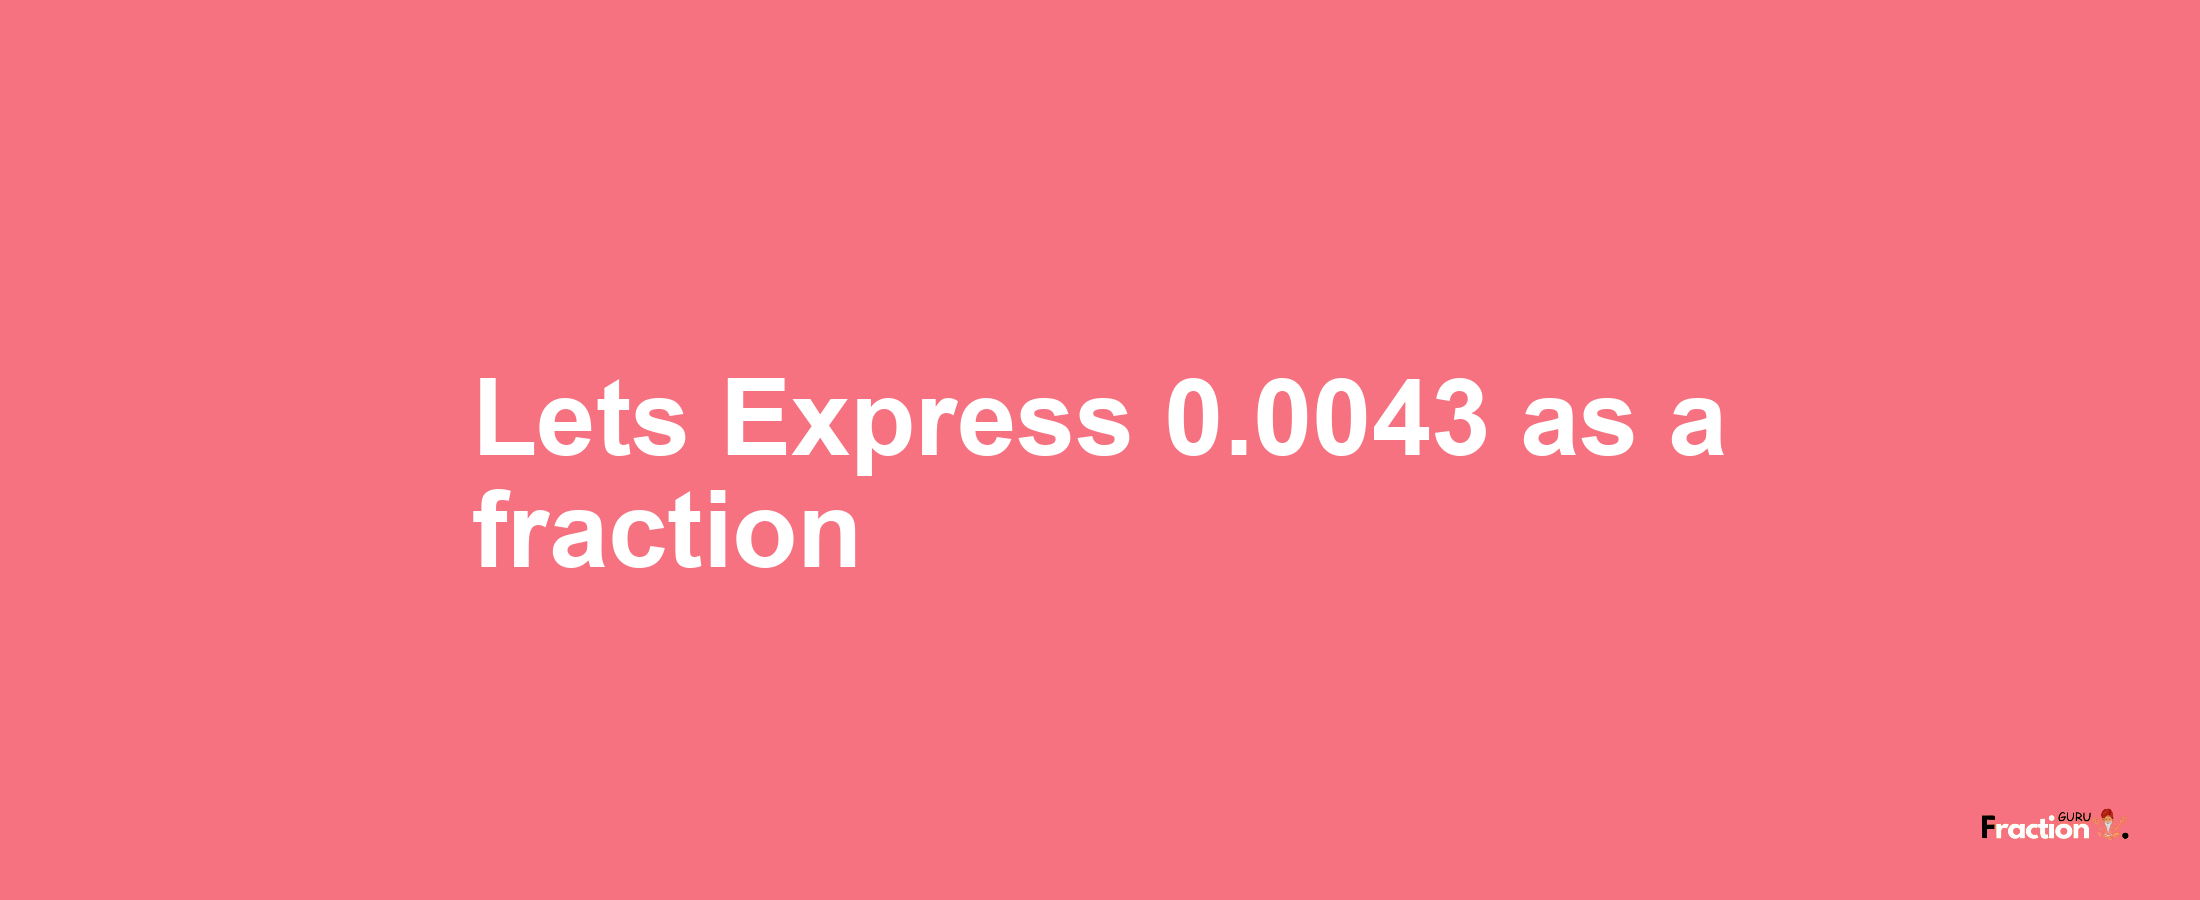 Lets Express 0.0043 as afraction